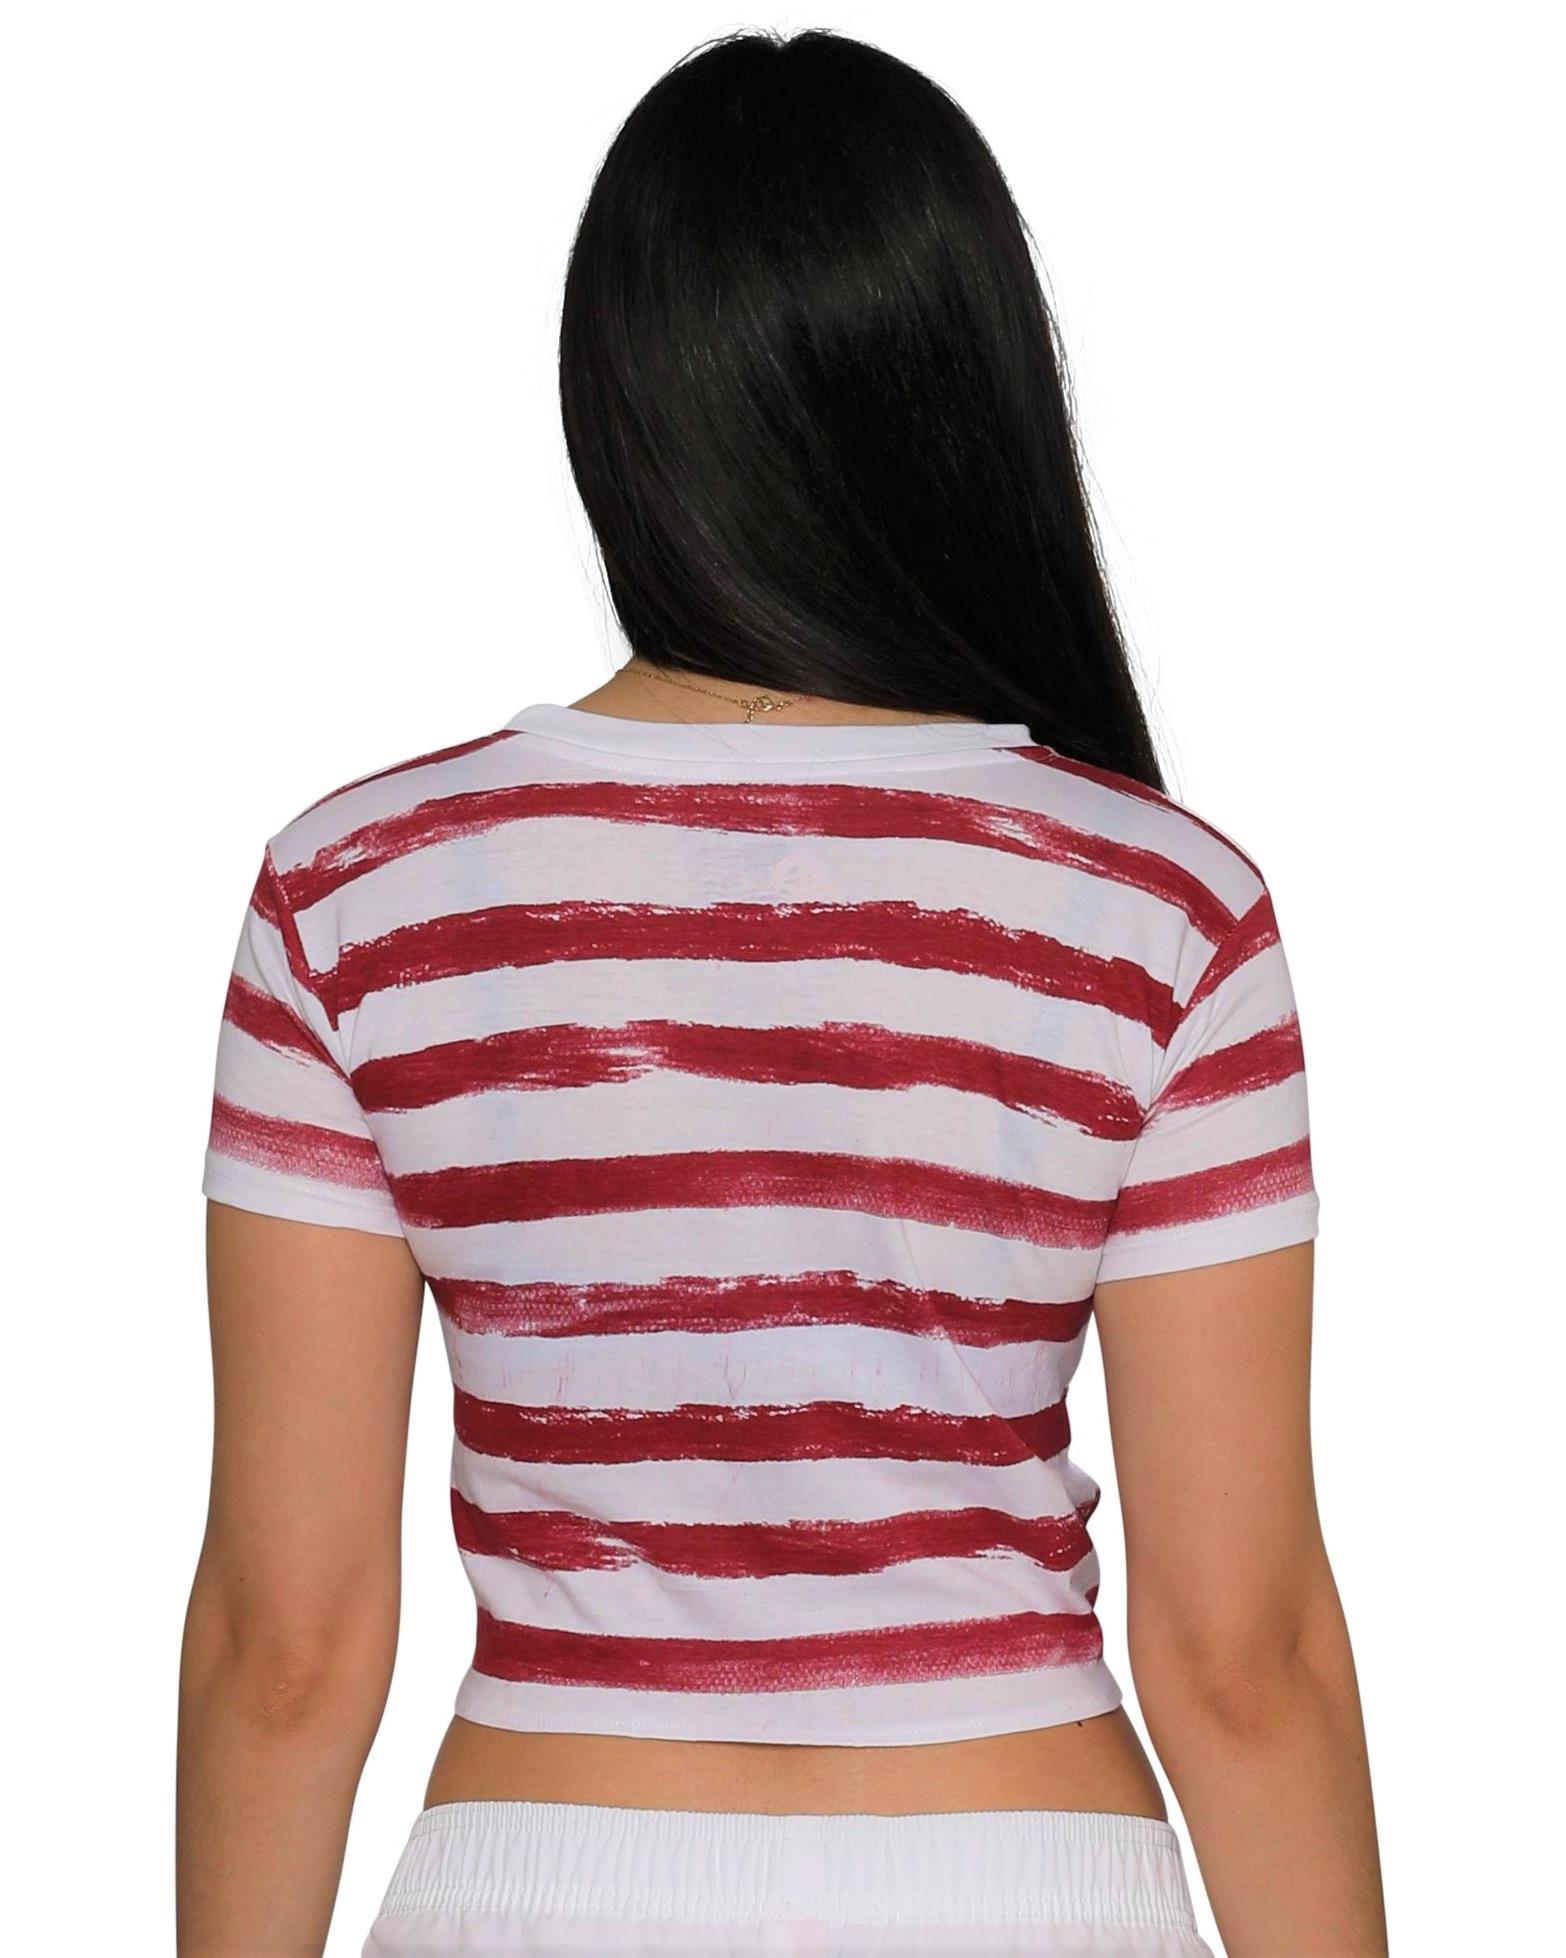 U.S. Vintage Knot Front Cuffed Sleeve / Sleeveless Stars and Stripes Crop Top Tee USA Patriotic T-Shirt, Stripes, Size: X-Small - image 2 of 2